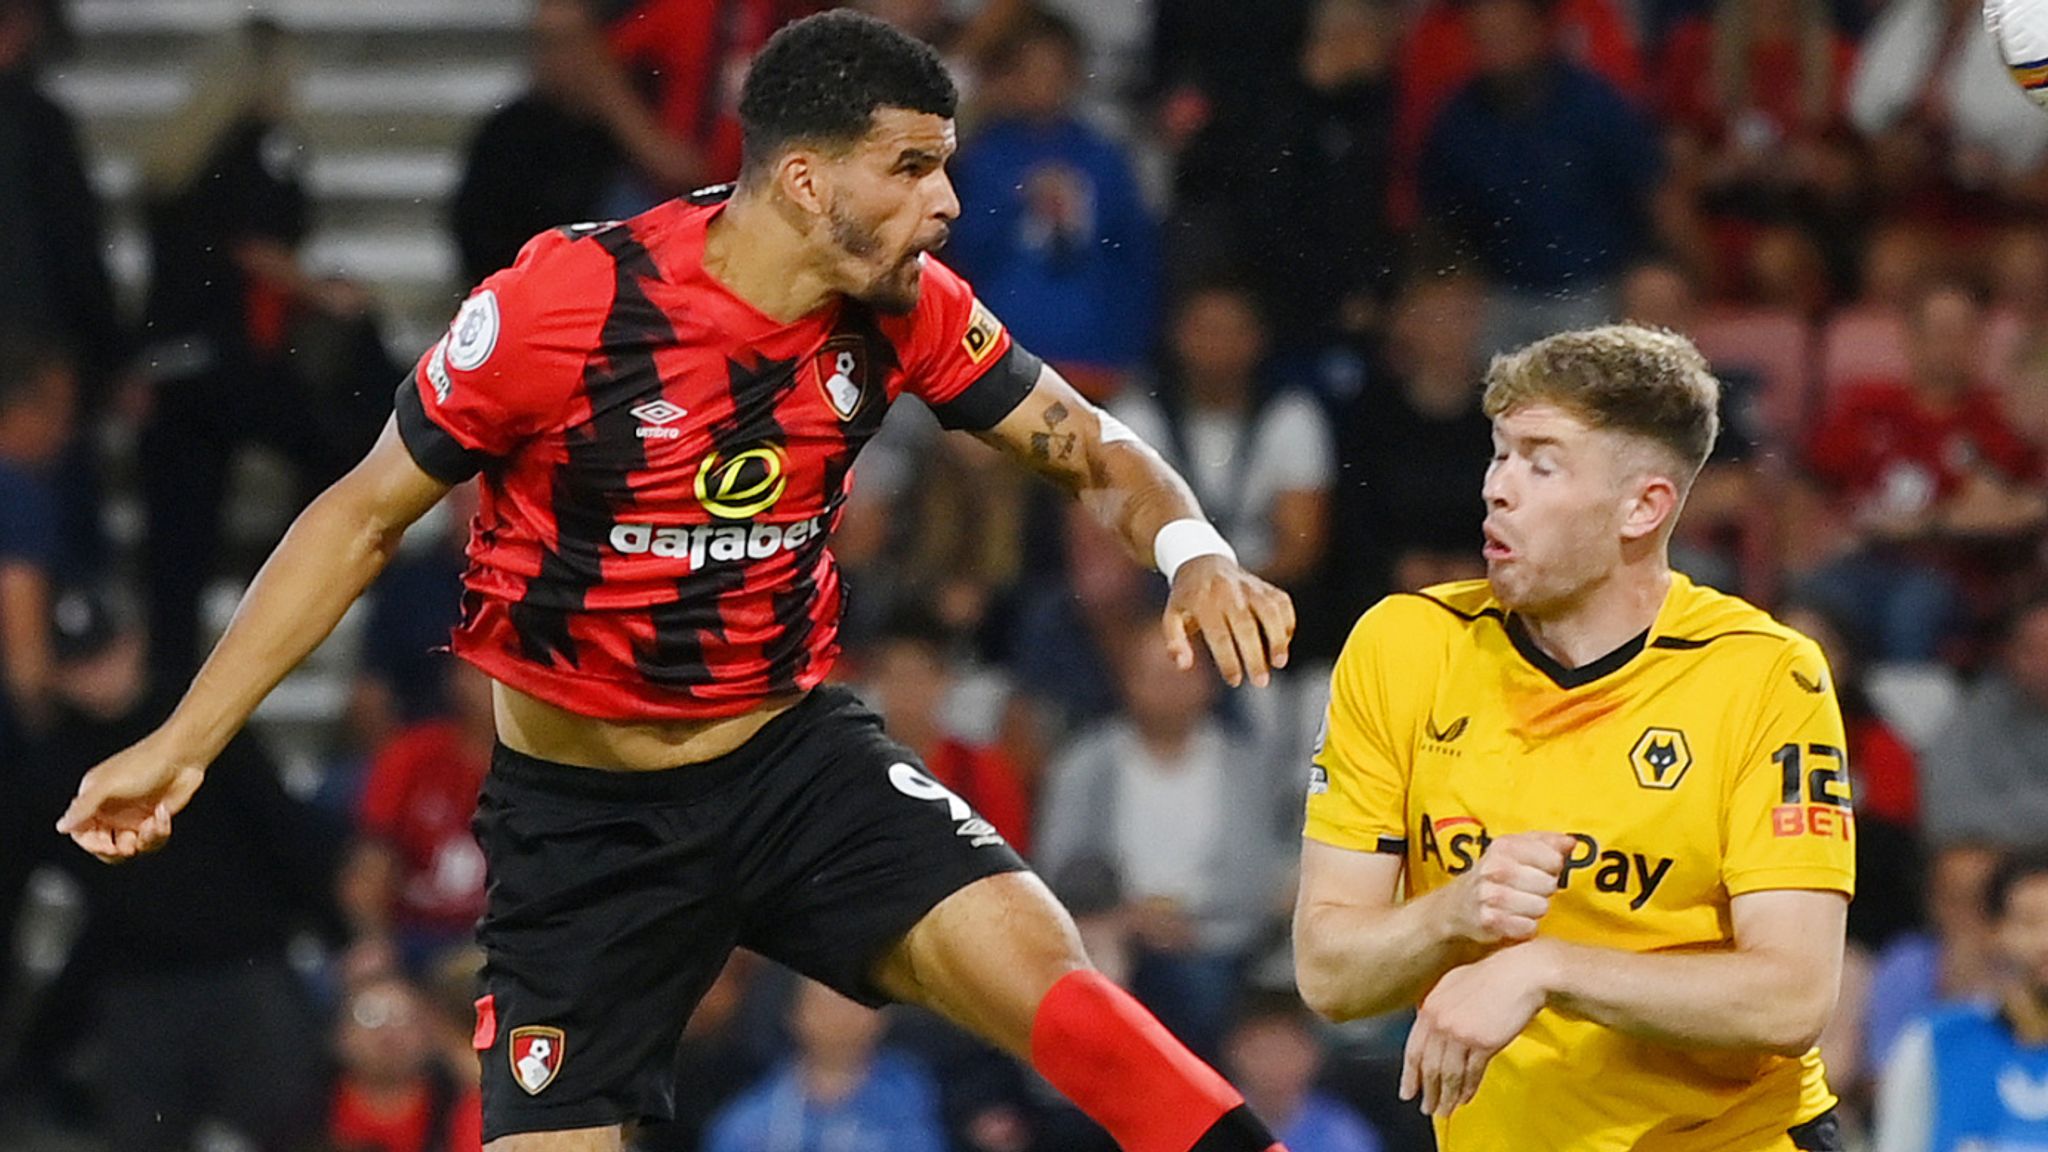 Bournemouth 0-0 Wolves highlights | Football News | Sky Sports